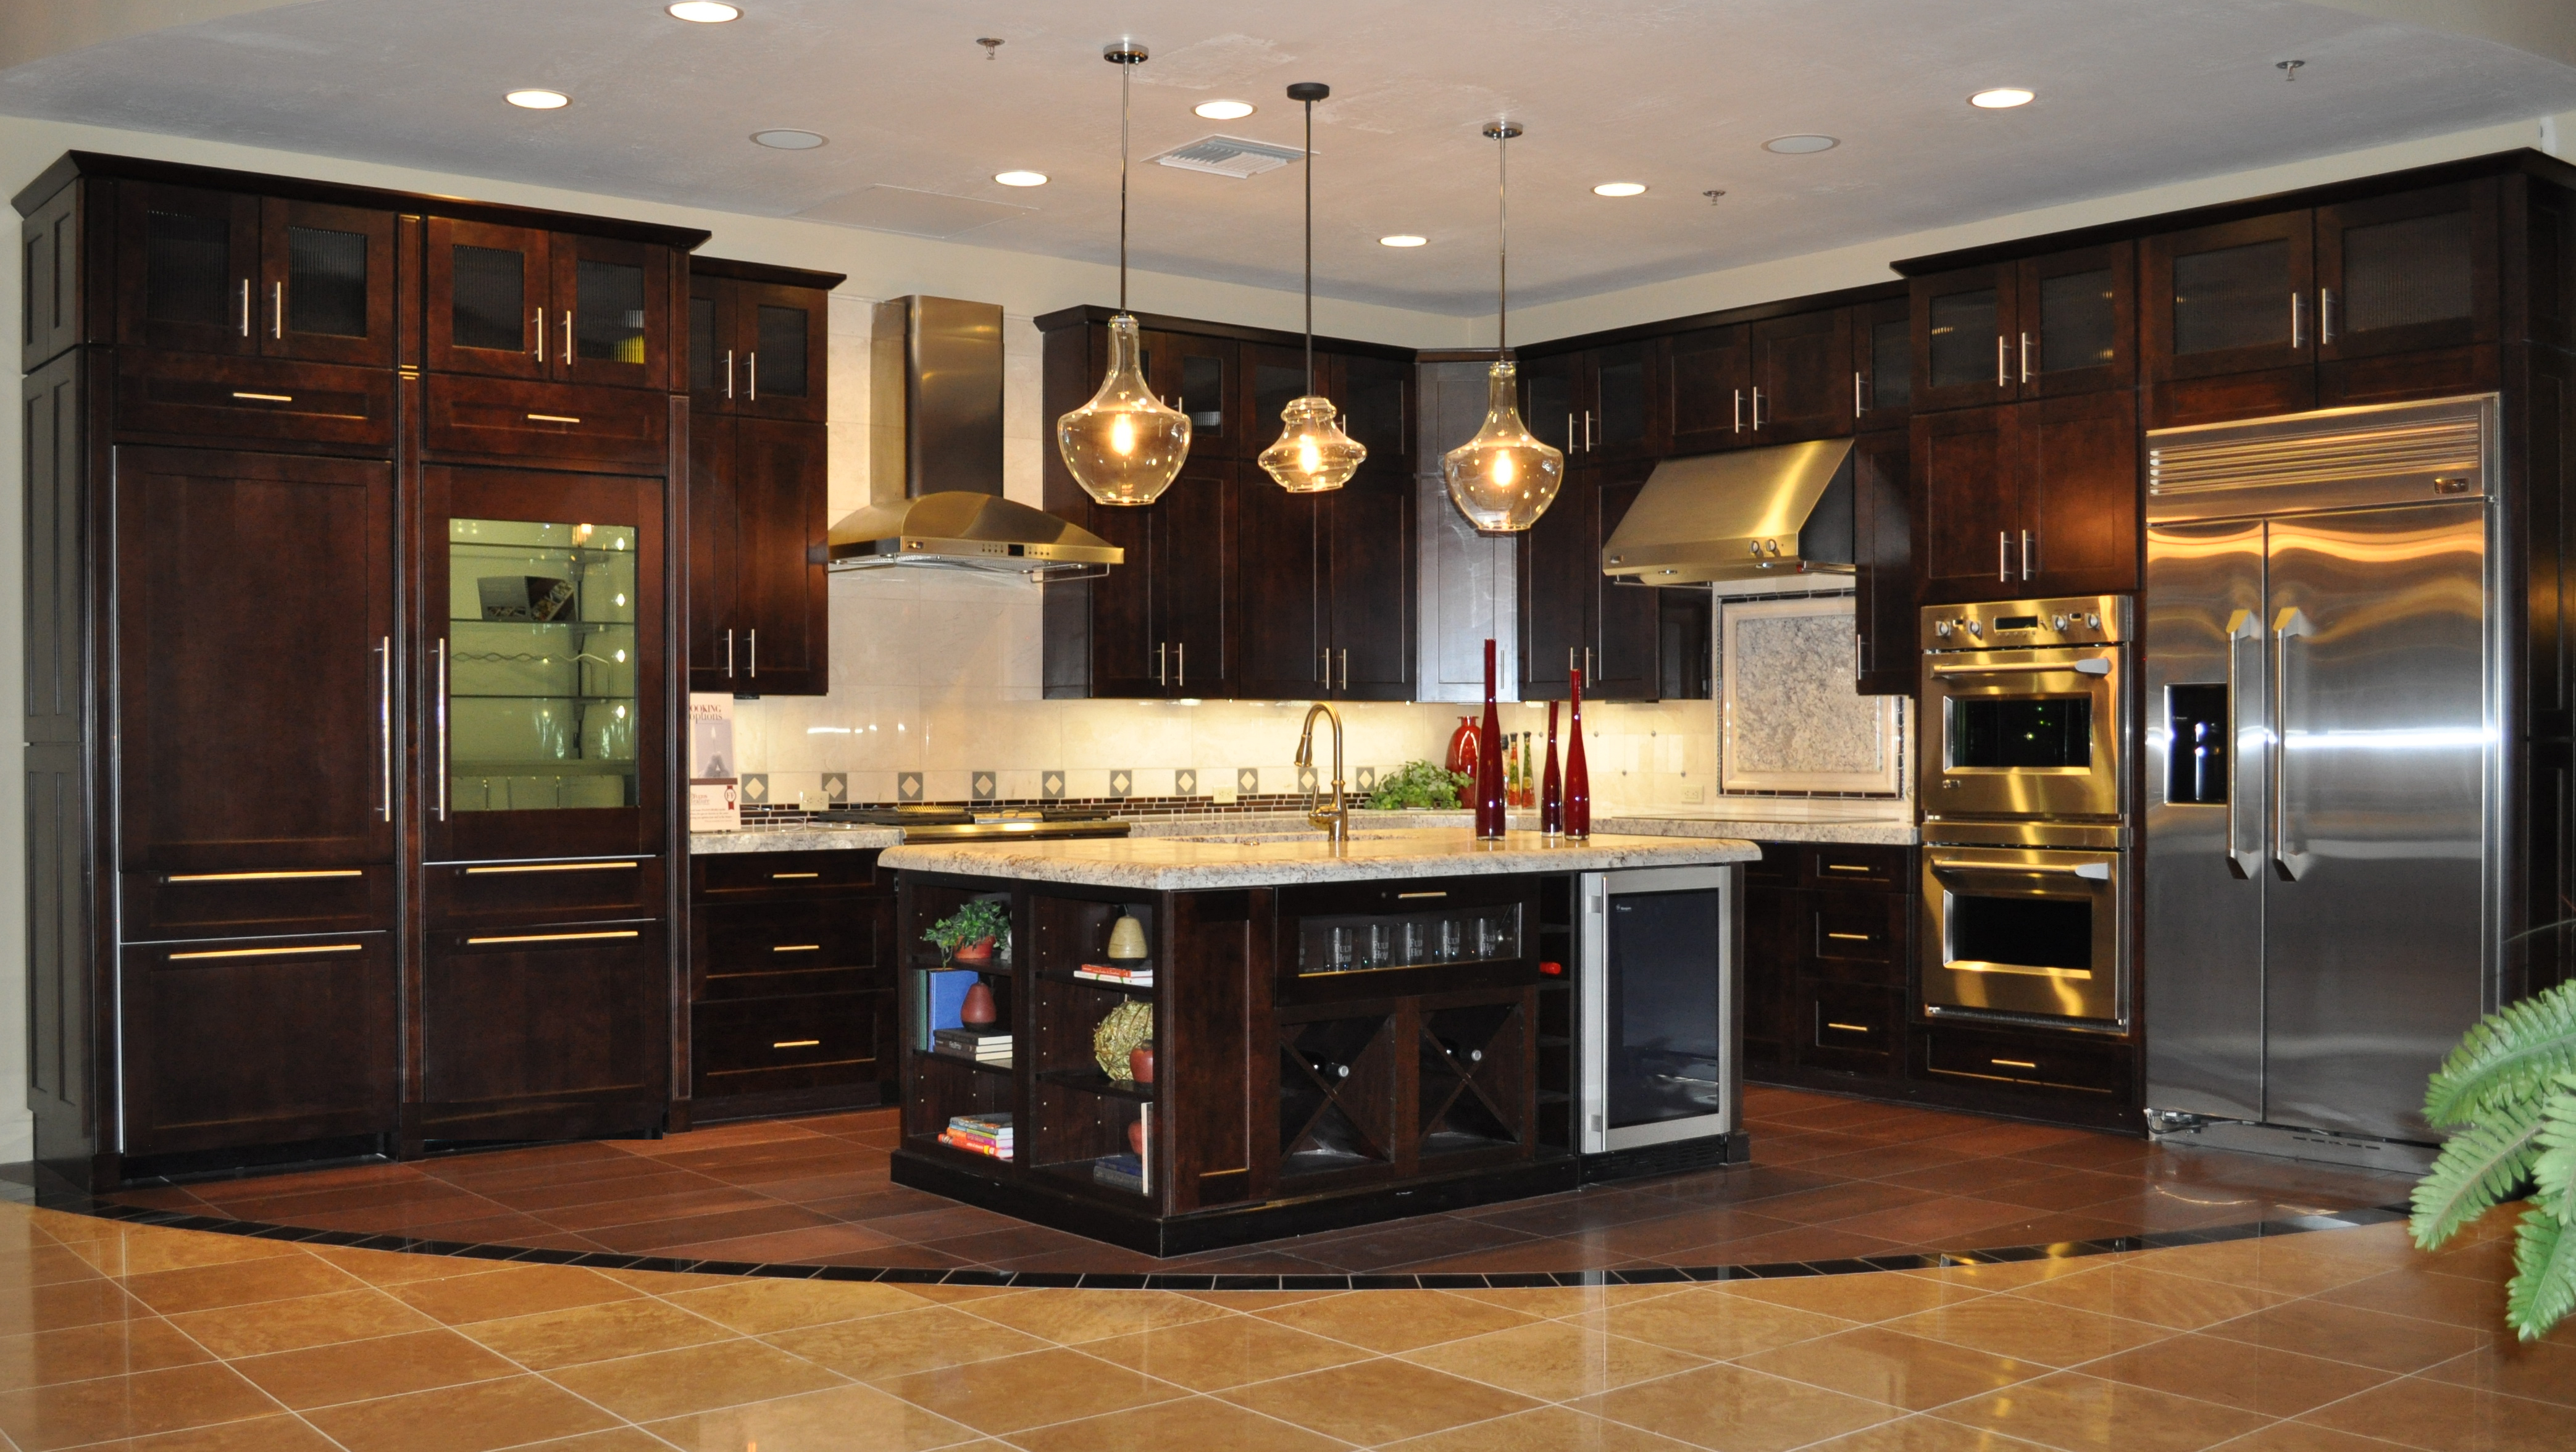 With the Fulton Design Center, you can design your perfect kitchen.